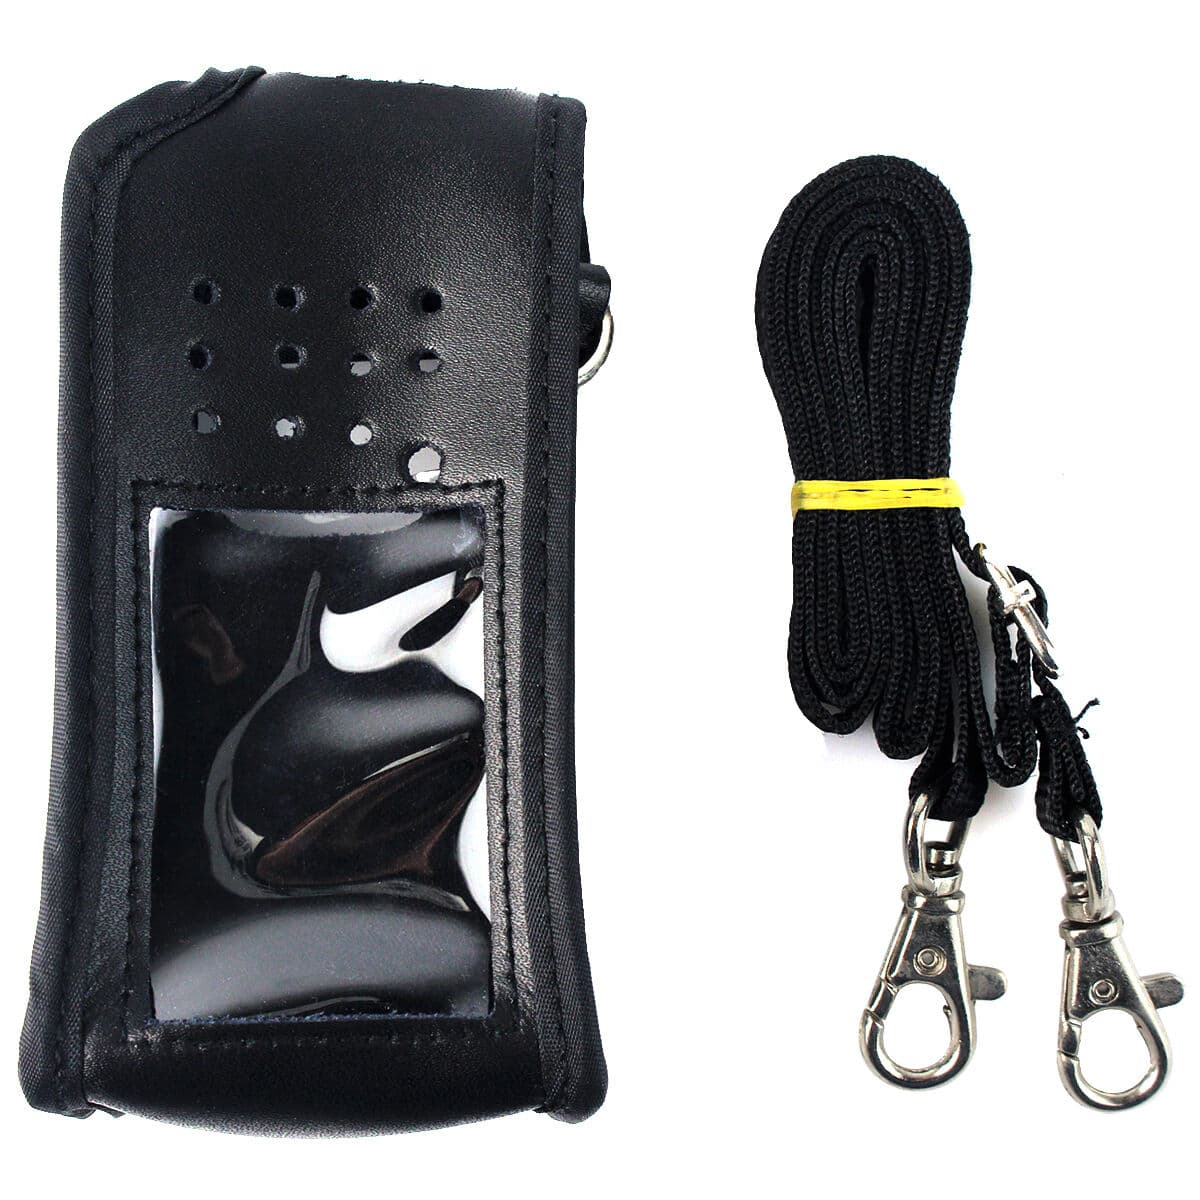 2pcs Radio Case Carrying Holder Holster for Retevis RT3 TYT MD380 Walkie Talkies 